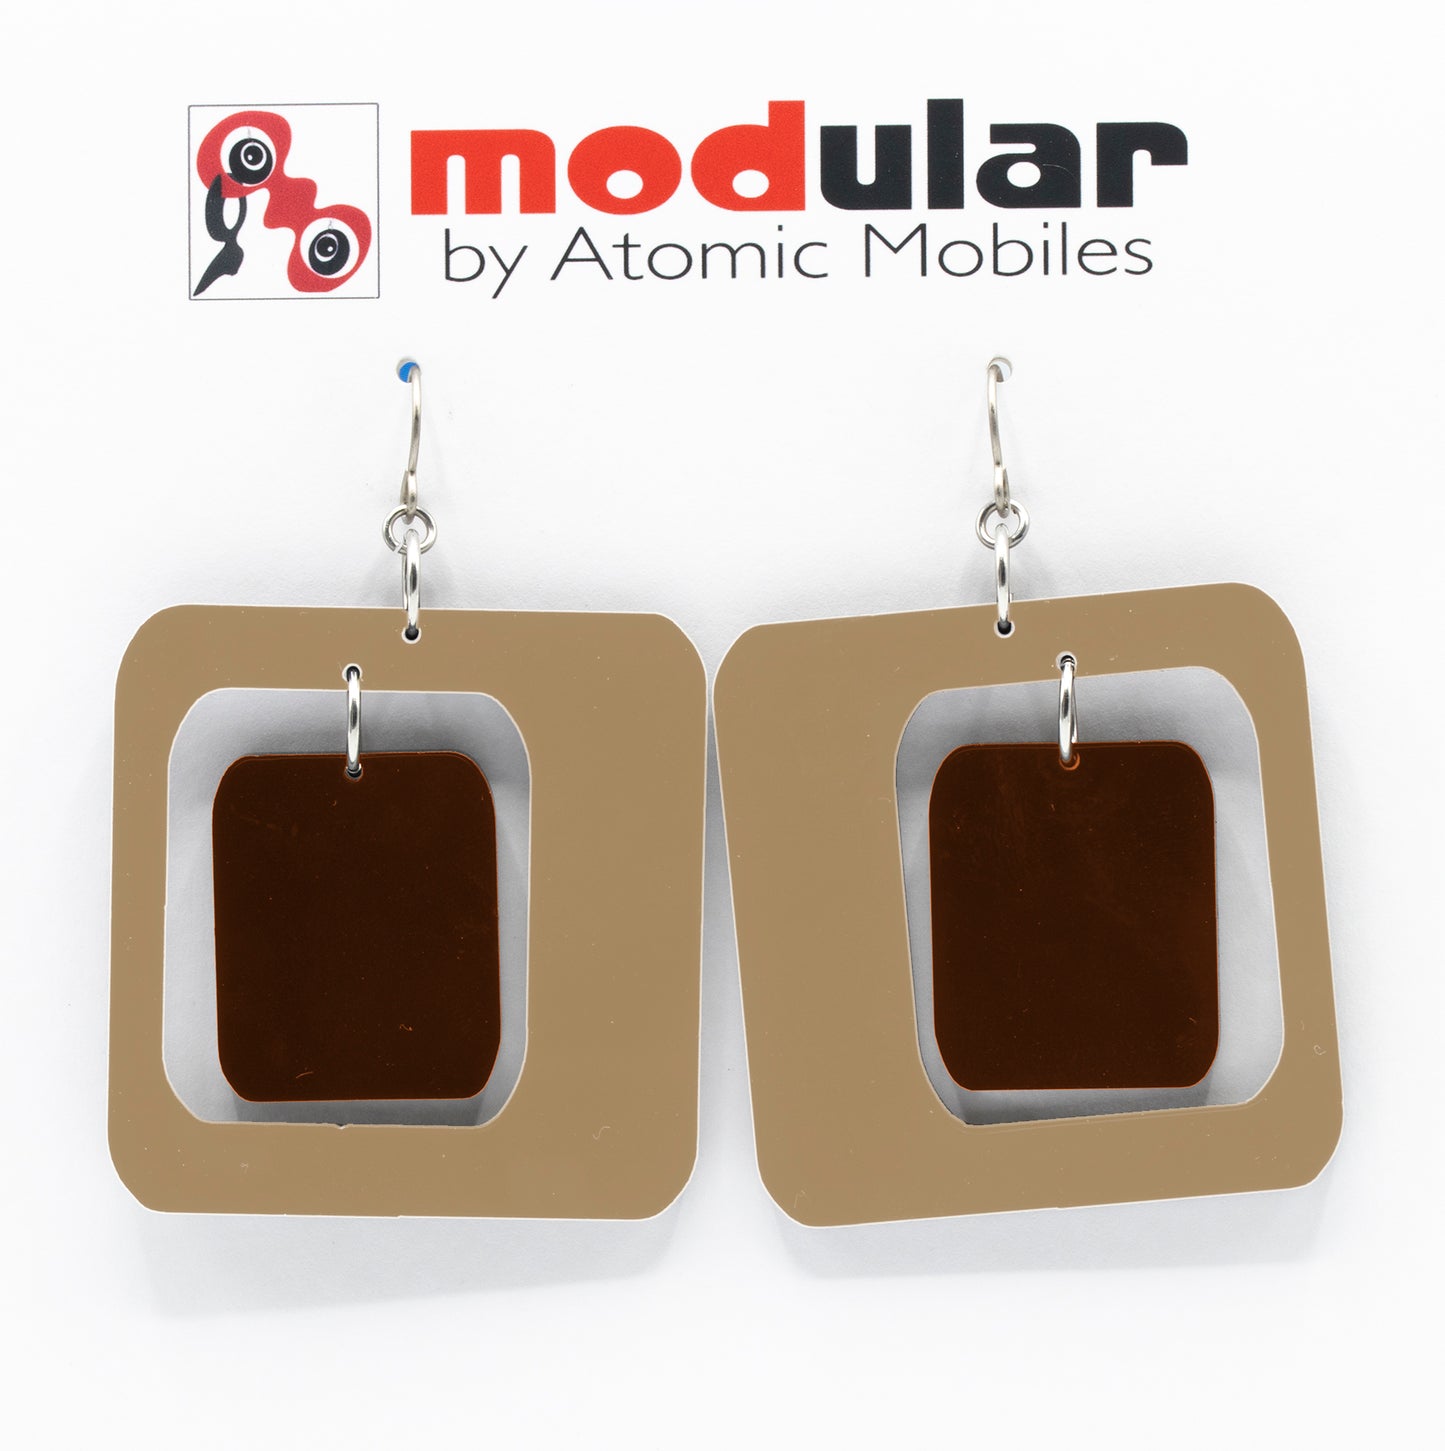 MODular Earrings - Coolsville Statement Earrings in Beige Tan and Brown by AtomicMobiles.com - retro era inspired mod handmade jewelry